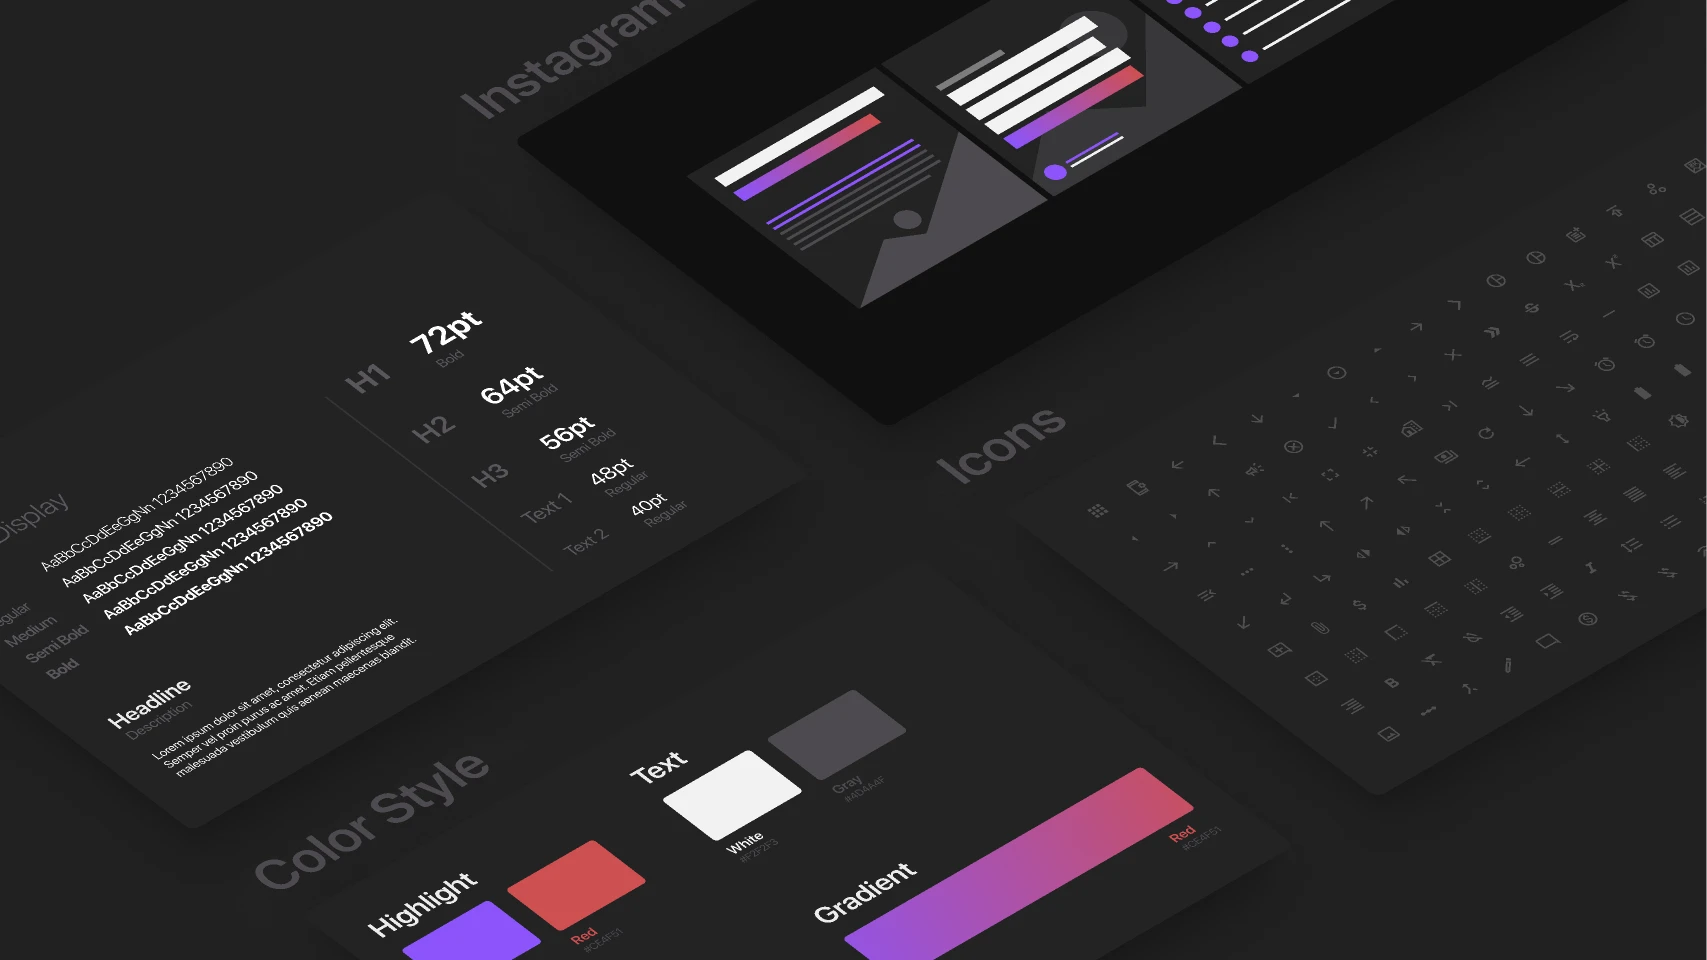 Design Style Guide Template free figma template for Design Systems